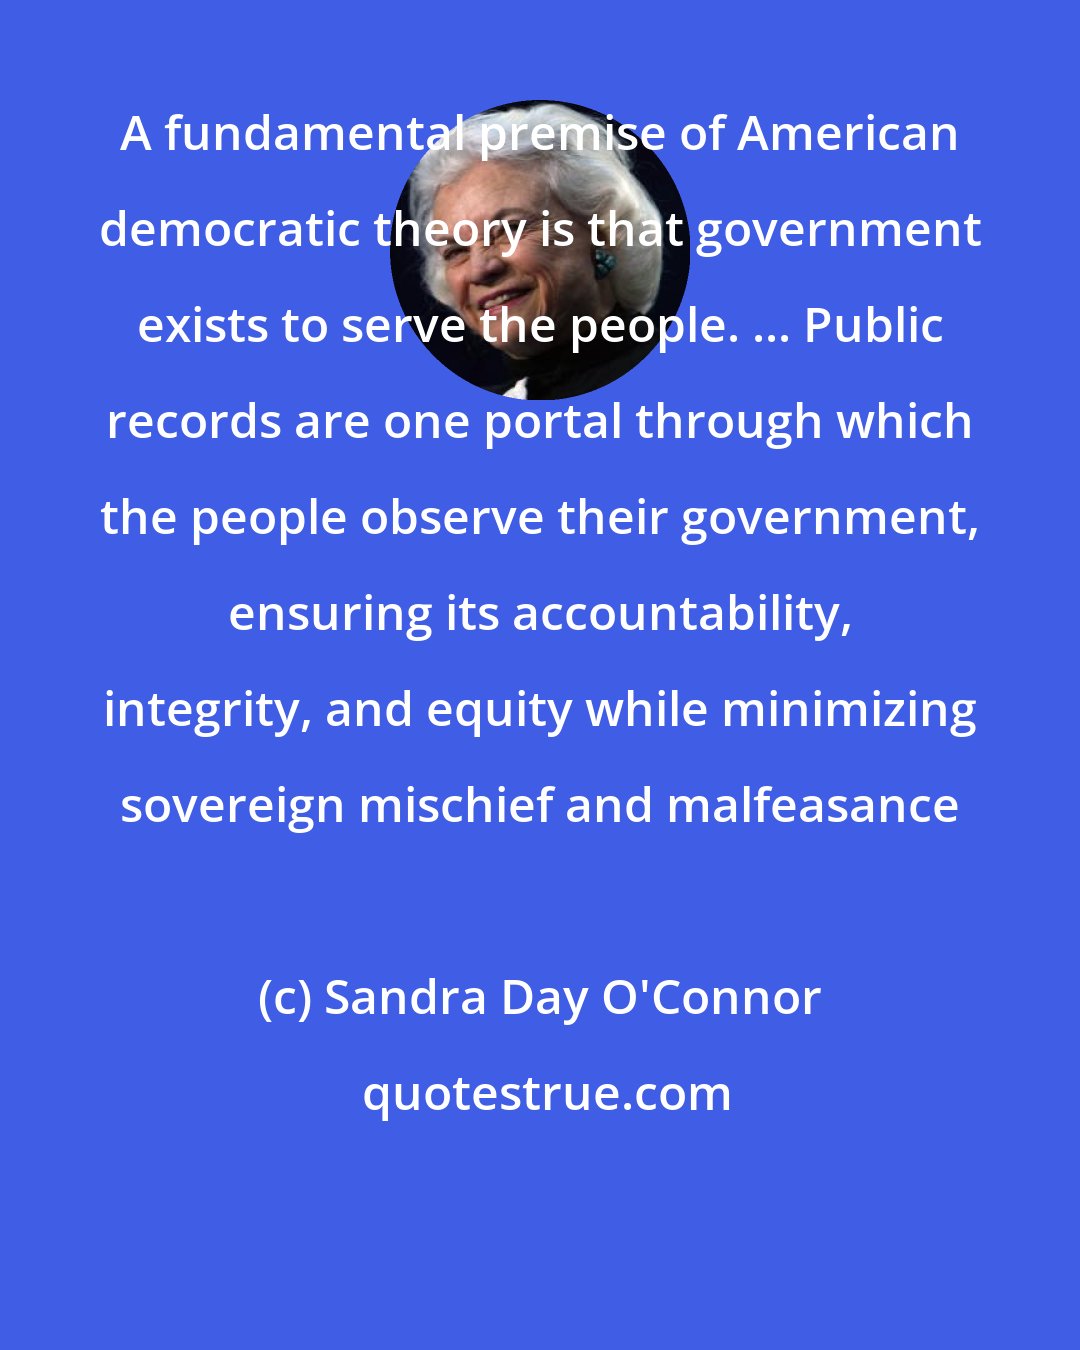 Sandra Day O'Connor: A fundamental premise of American democratic theory is that government exists to serve the people. ... Public records are one portal through which the people observe their government, ensuring its accountability, integrity, and equity while minimizing sovereign mischief and malfeasance